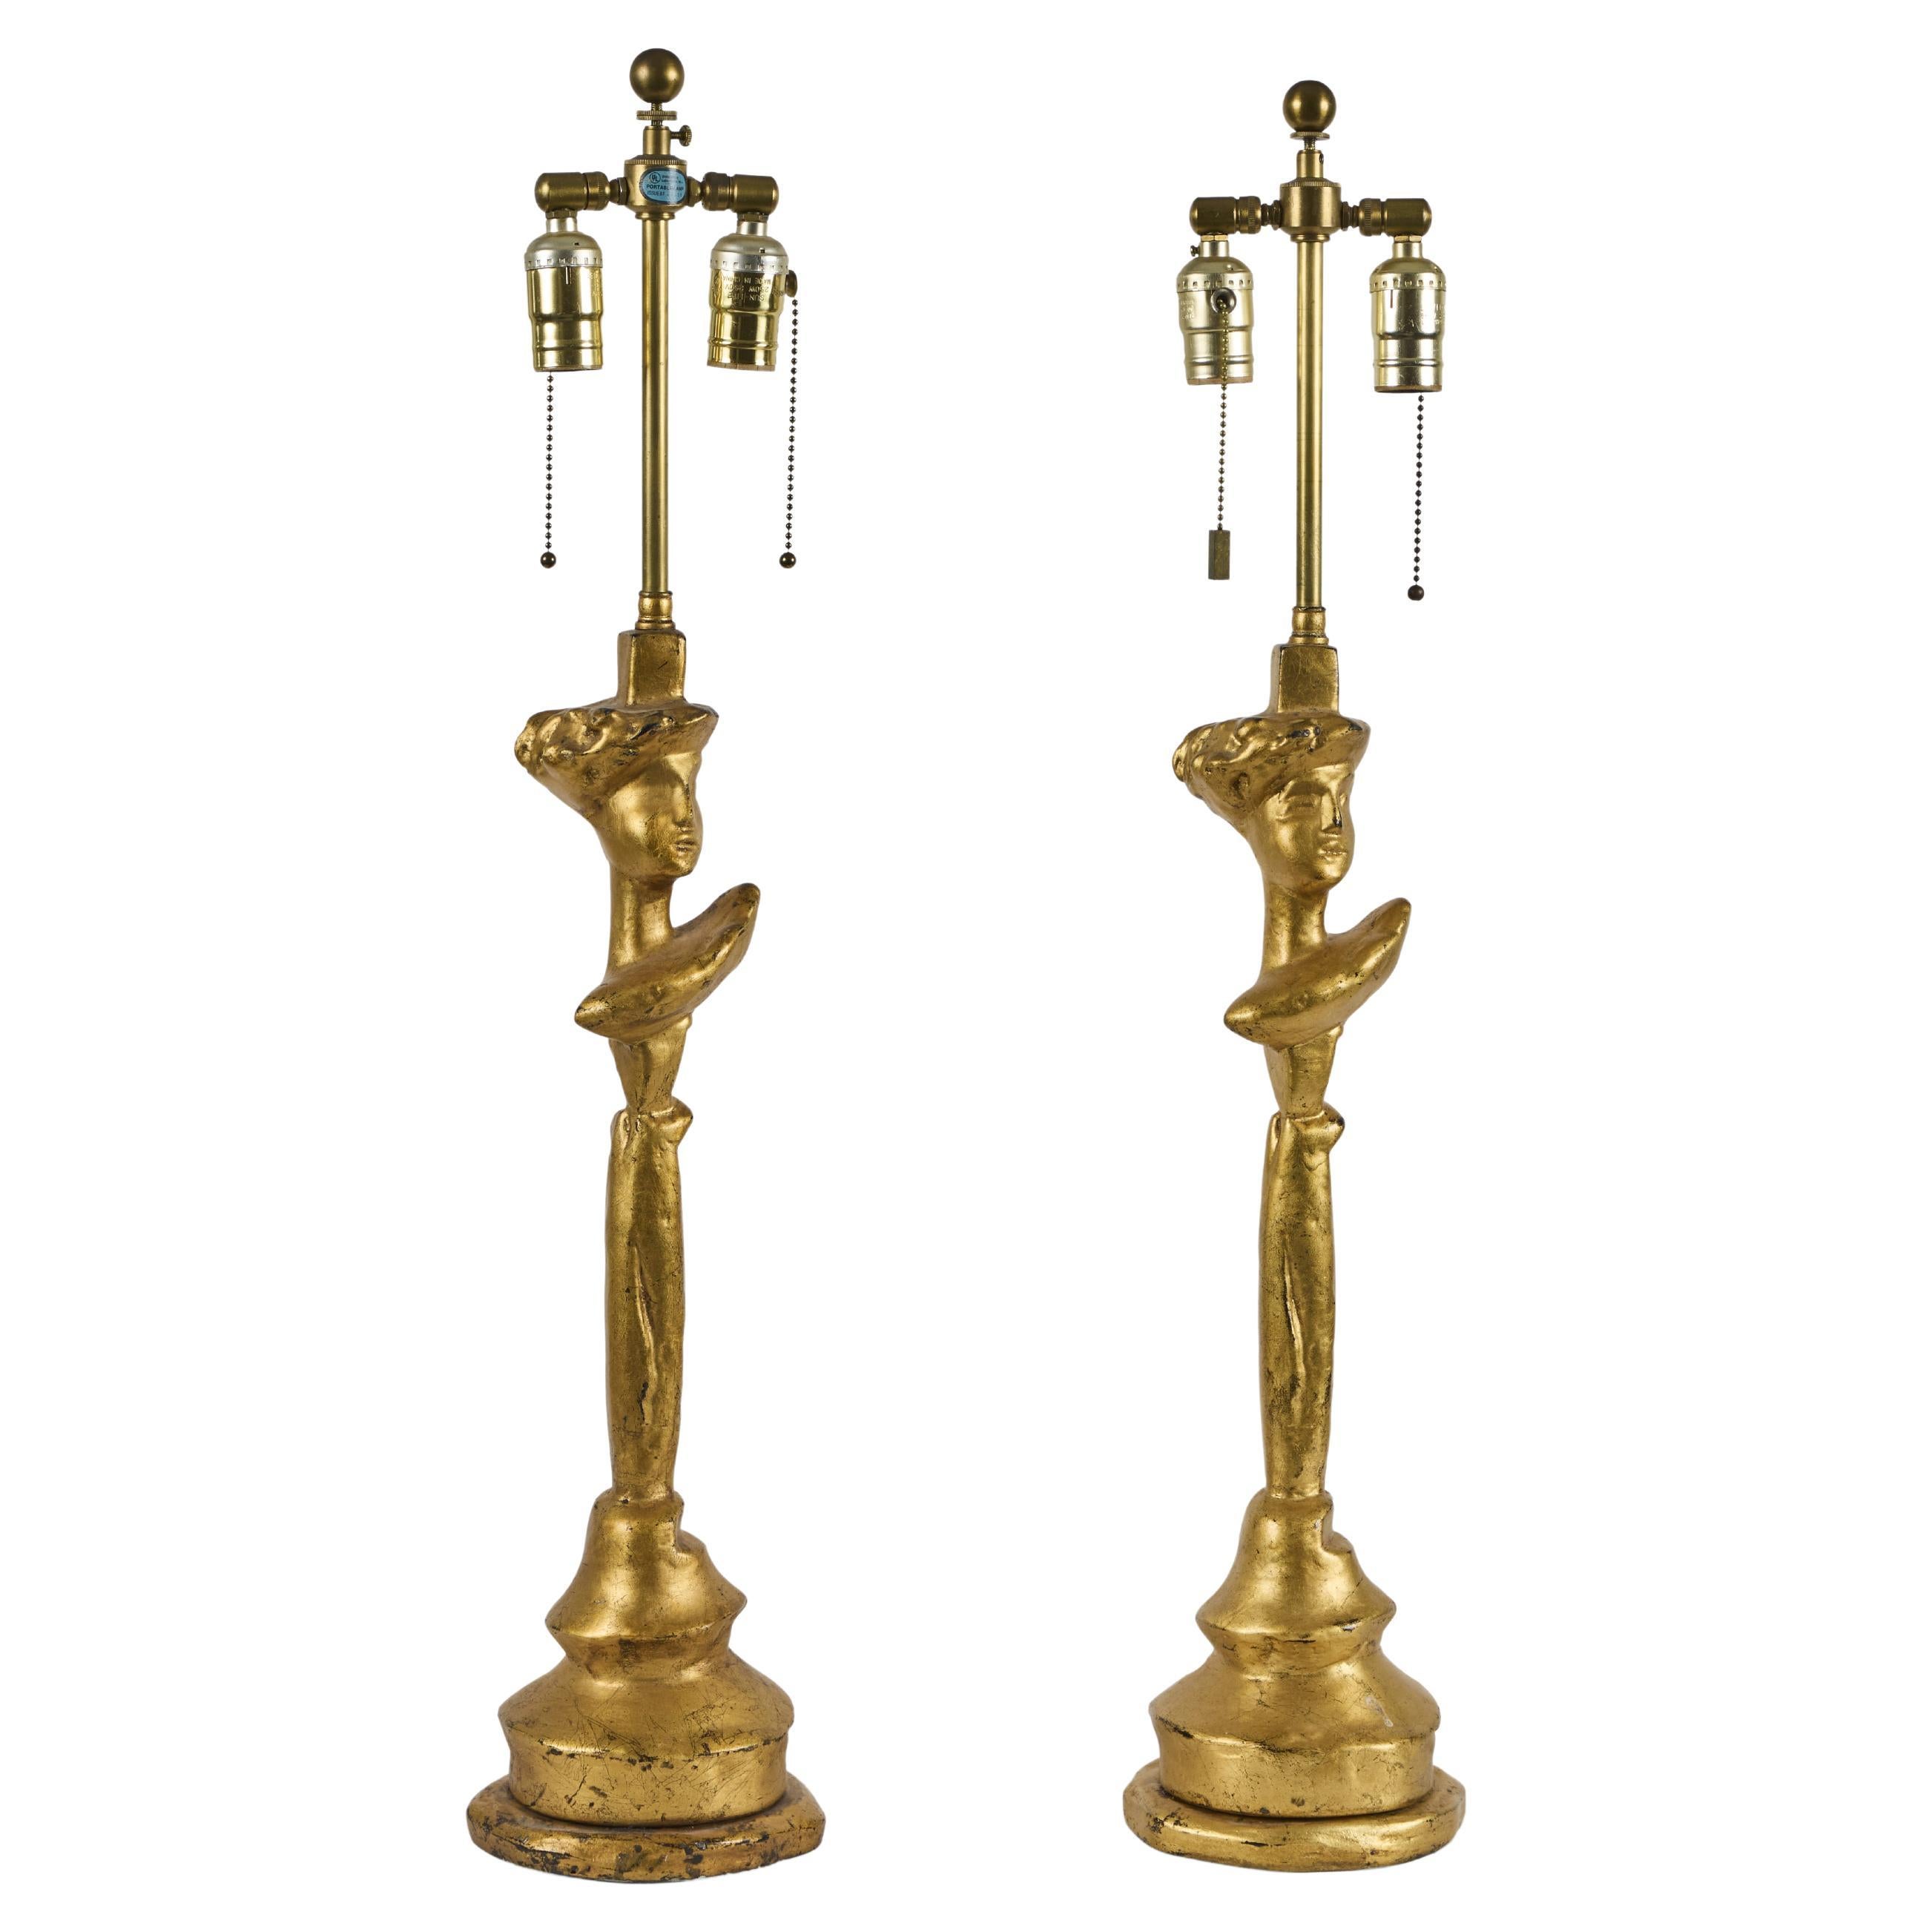 Giacometti Inspired Pair of Tete-a-Tete Lamps by Sirmons